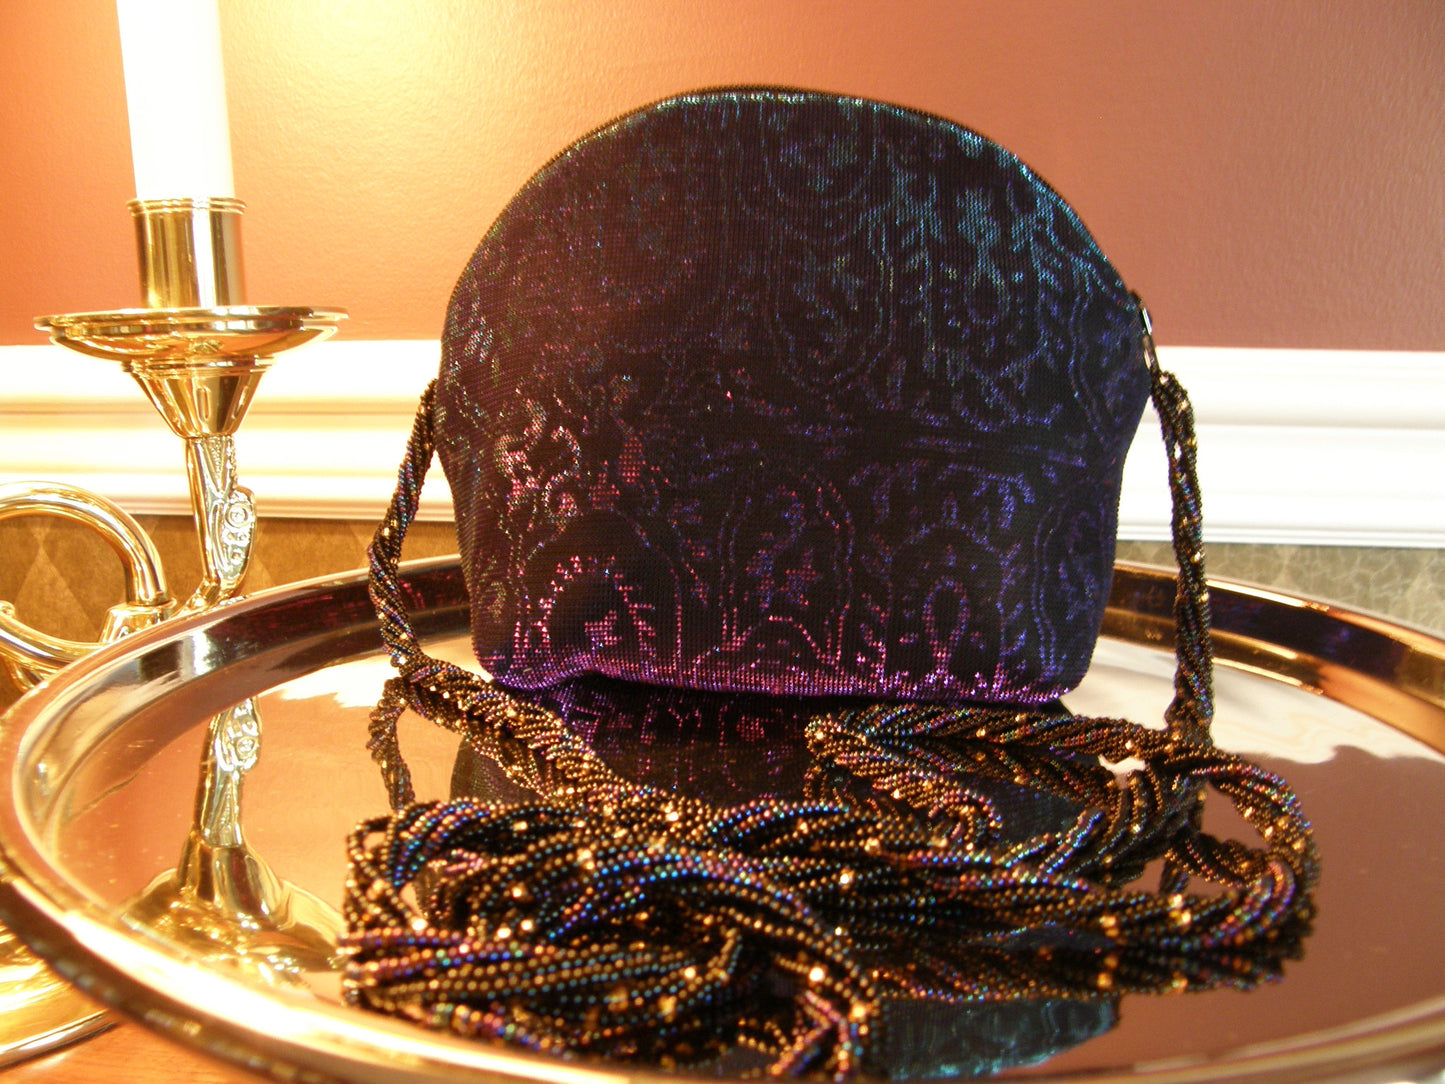 Iridescent Evening Bag by Jenny Jag-Wear Design. This is a stunning small evening bag made from purple, black, and turquoise fabric. The hand-crafted beaded handle is comprised of multiple strands of seed beads in the same colour hue as the fabric. Zipper enclosure. Can be carried as a small clutch or carried over the shoulder with the  long beaded handle. This small purse is hand sewn and hand-crafted. The Liza Collection by Jenny Jag-Wear Design.